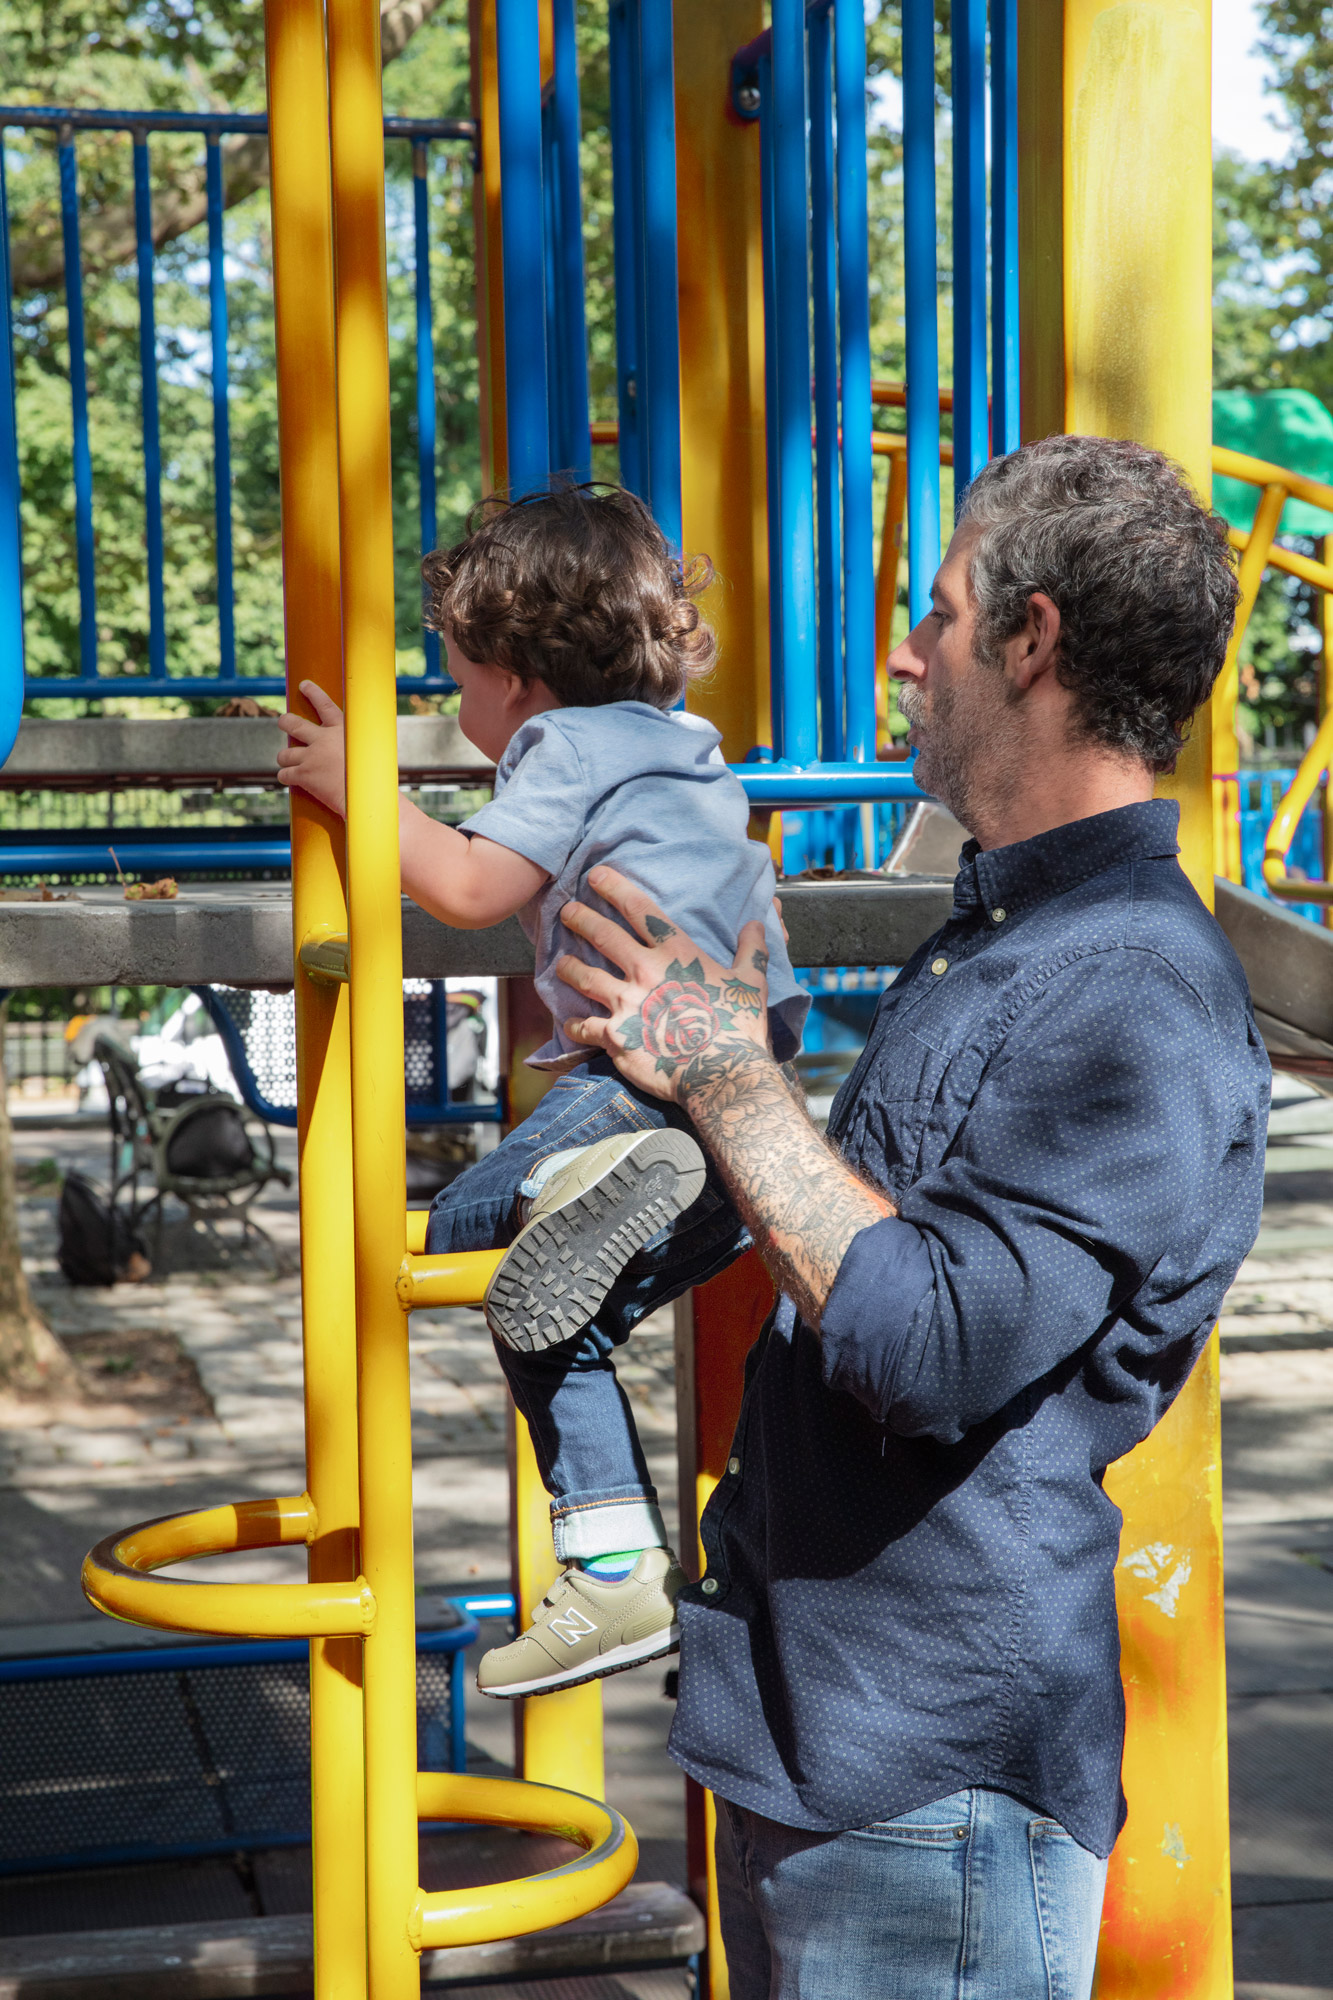 Father helps son up onto a playground equipment at the park